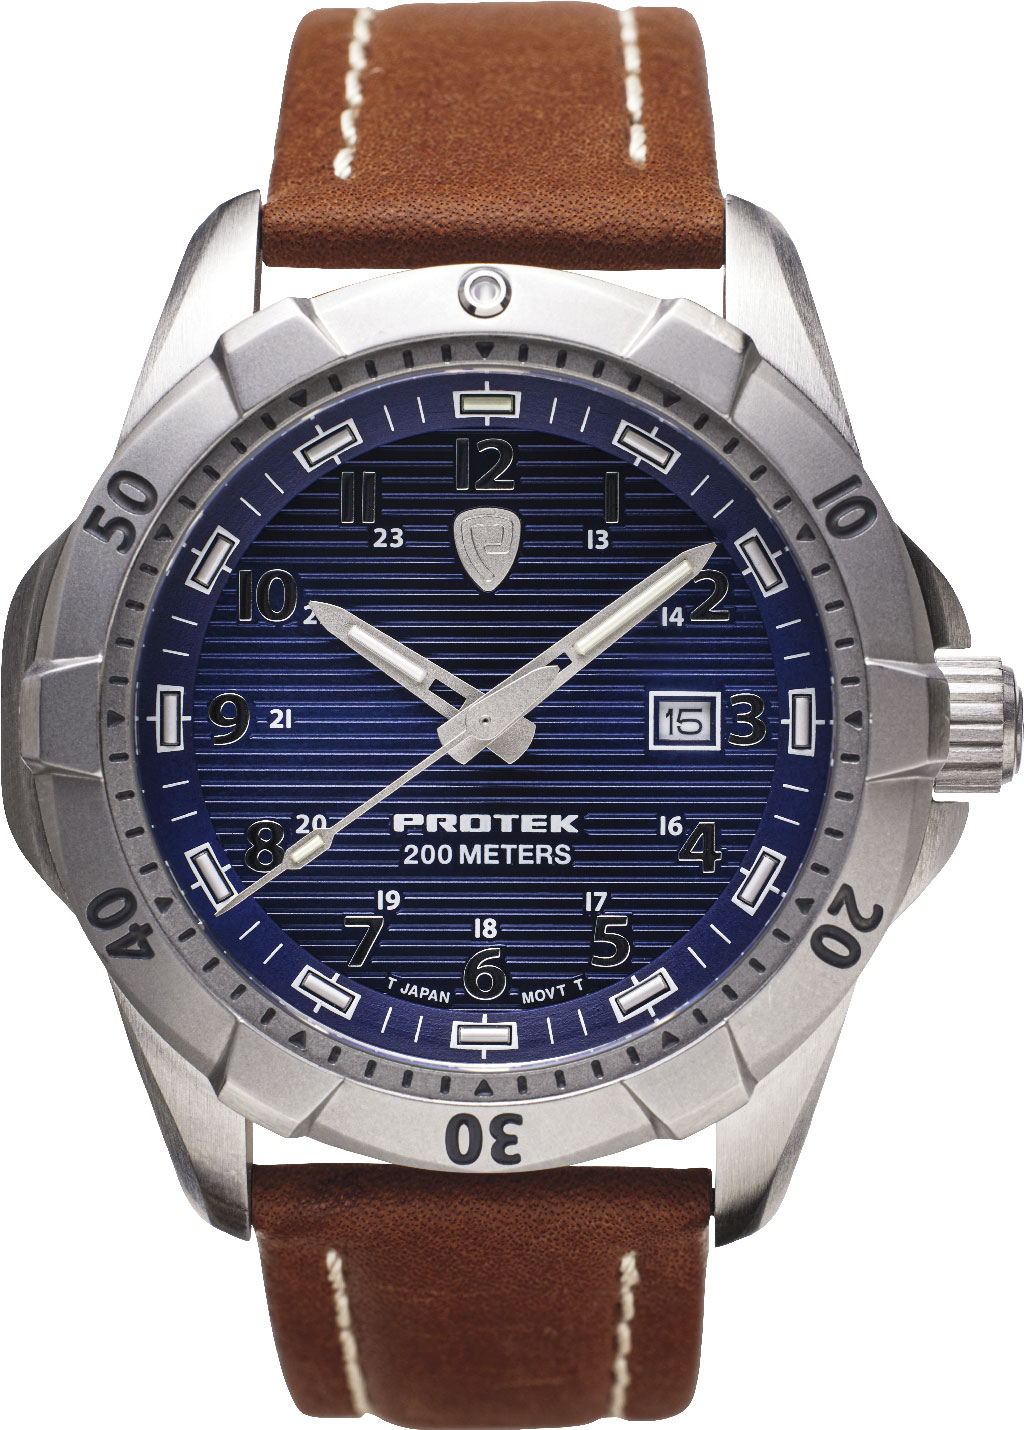 protek watch with blue face